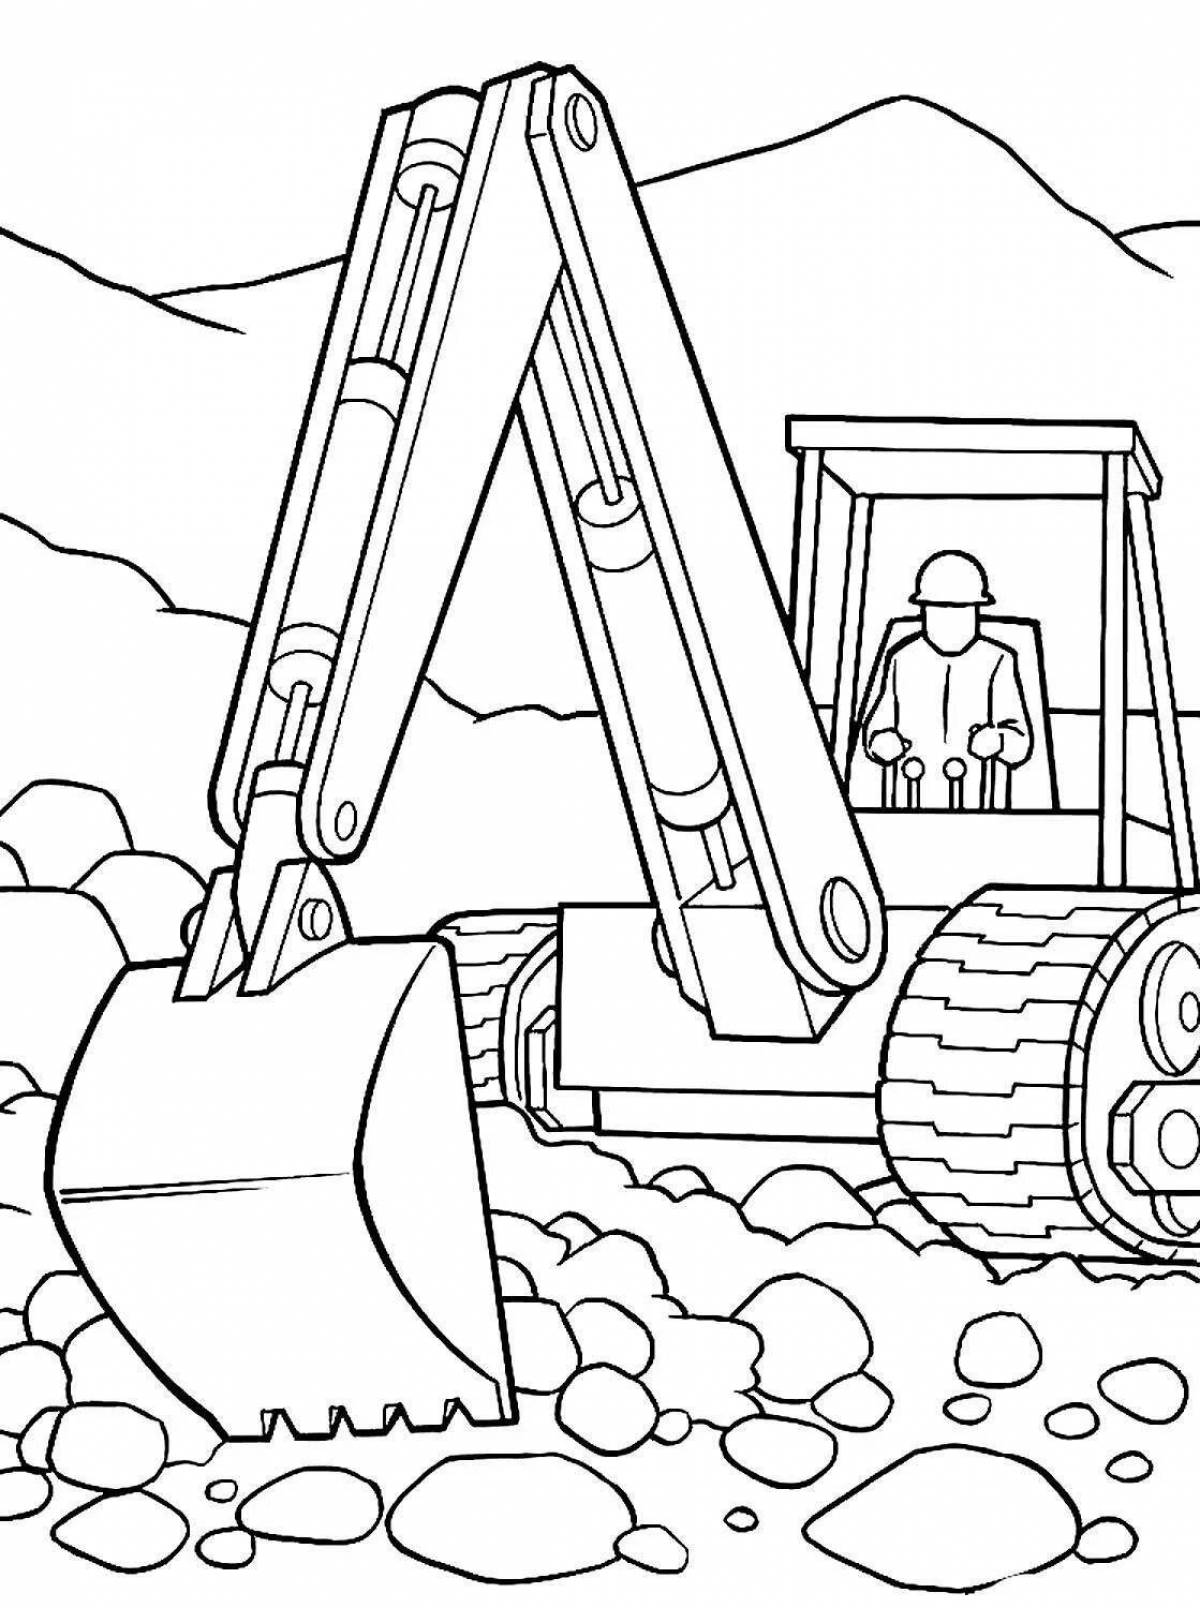 Colorful excavator coloring page for 5-6 year olds